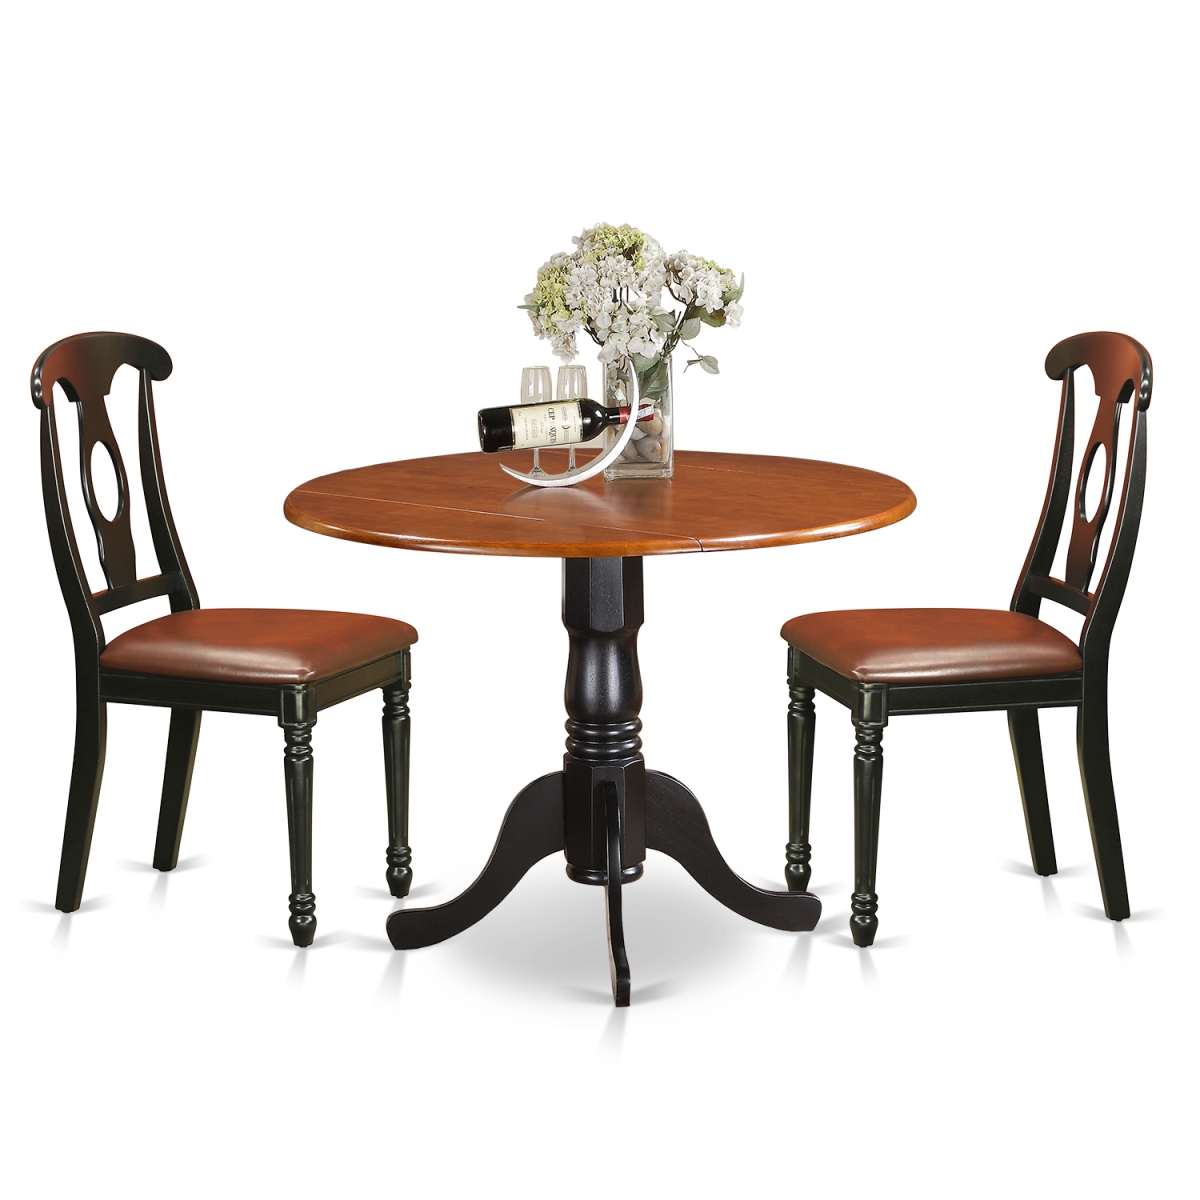 Picture of East West Furniture DLKE3-BCH-LC Faux Leather Dublin Kitchen Table Set - Dining Table & 2 Chairs, Black & Cherry - 3 Piece